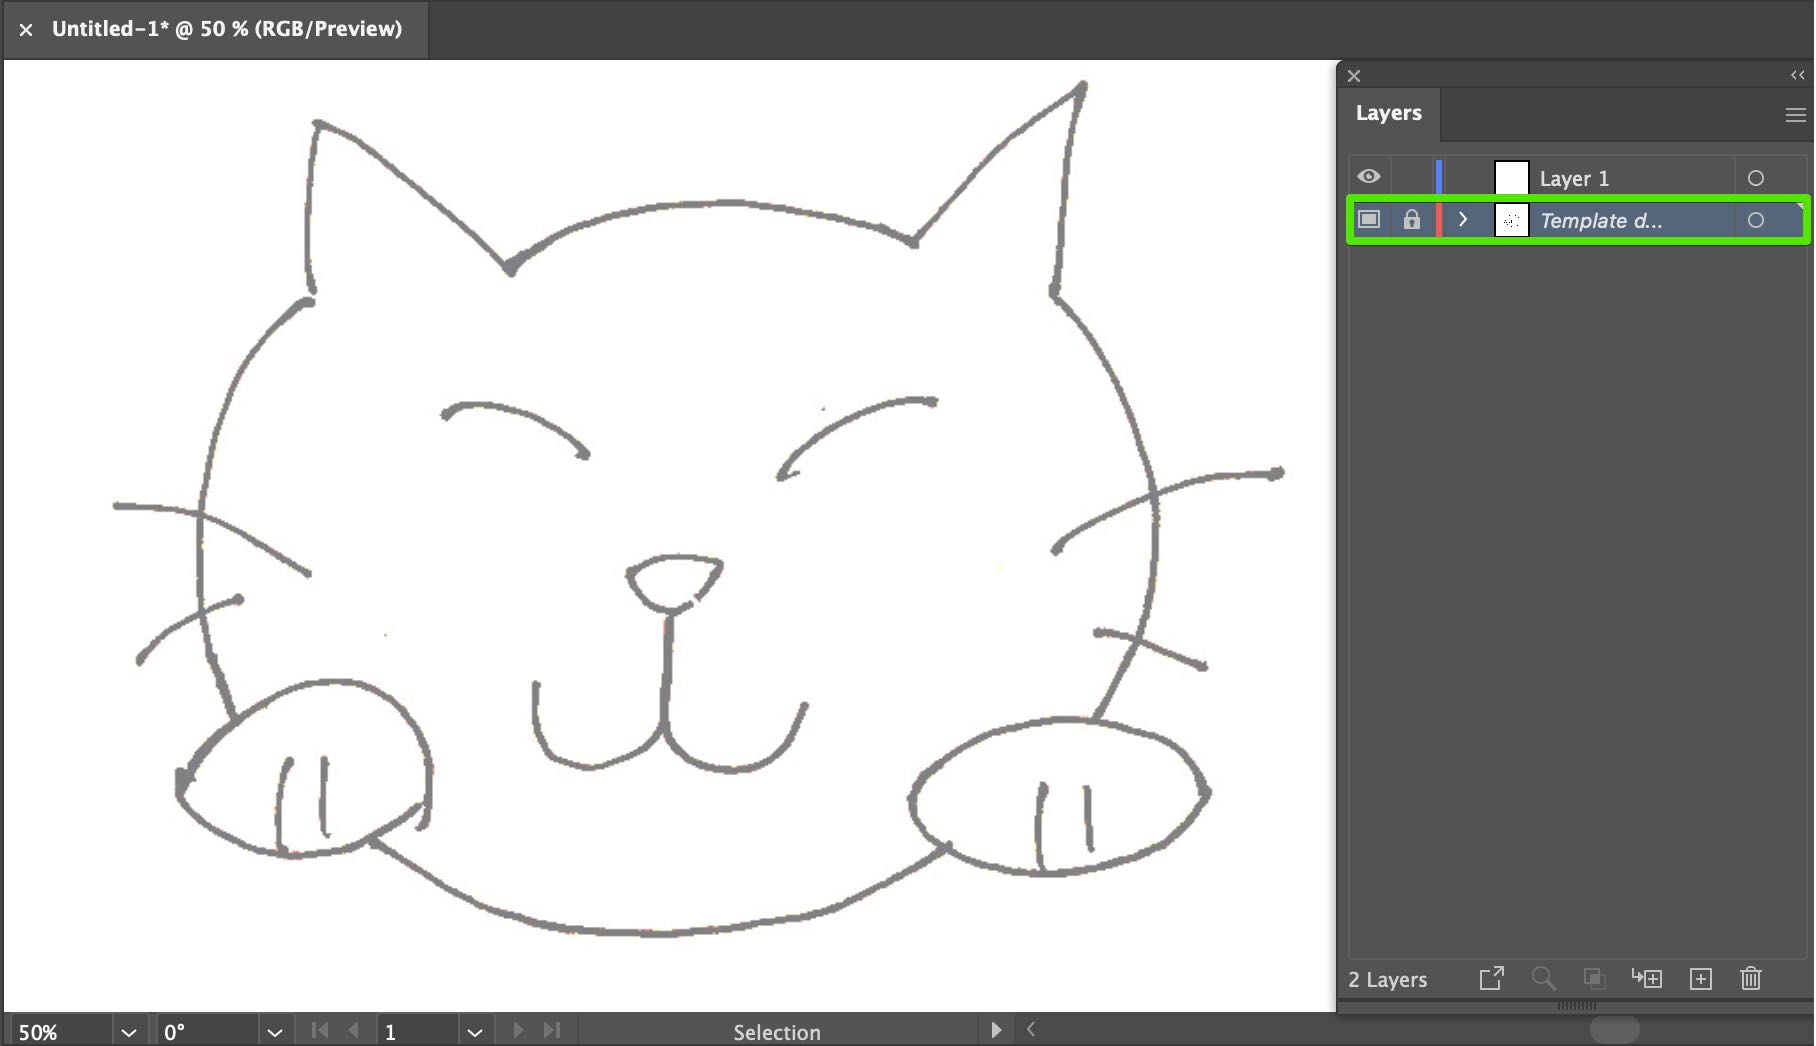 How to Draw in Adobe Illustrator With 5 Simple Tools